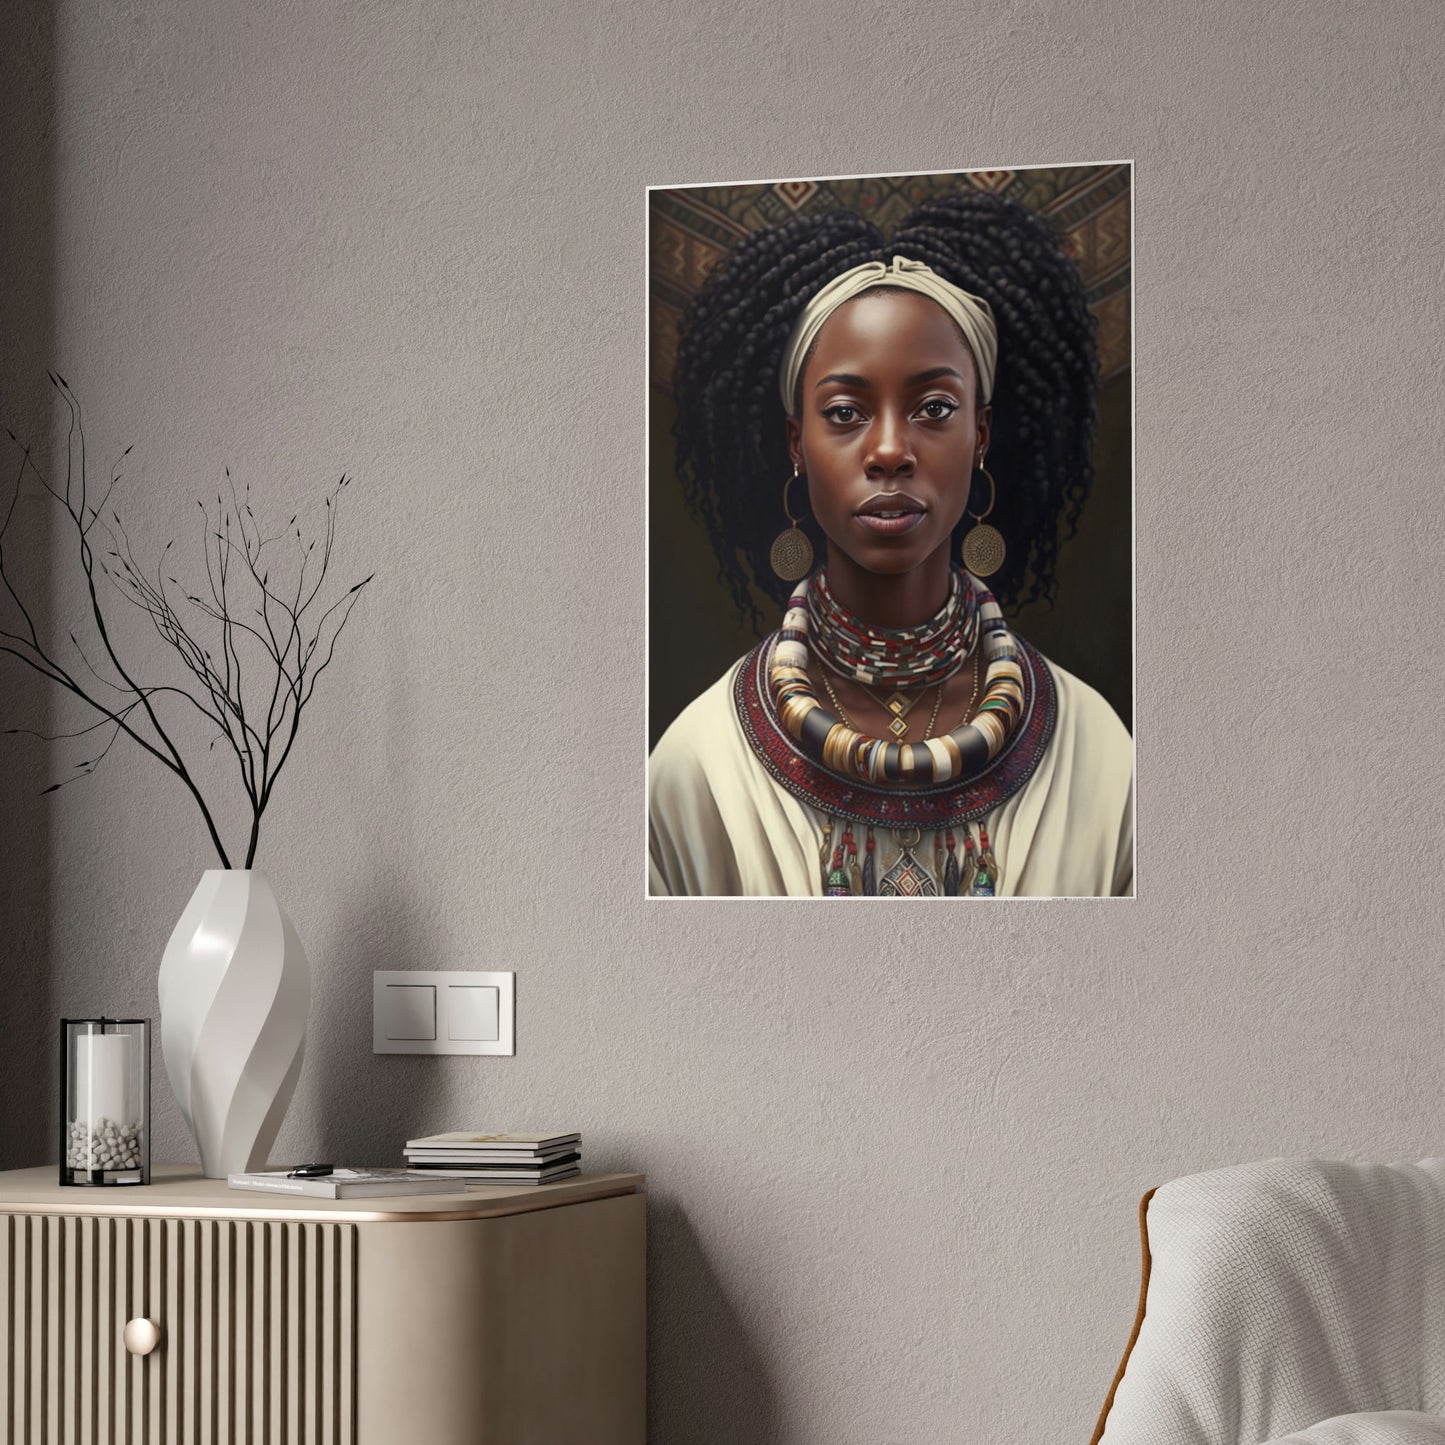 Vibrant Colors of Africa: Stunning Framed Canvas of a Graceful Lady